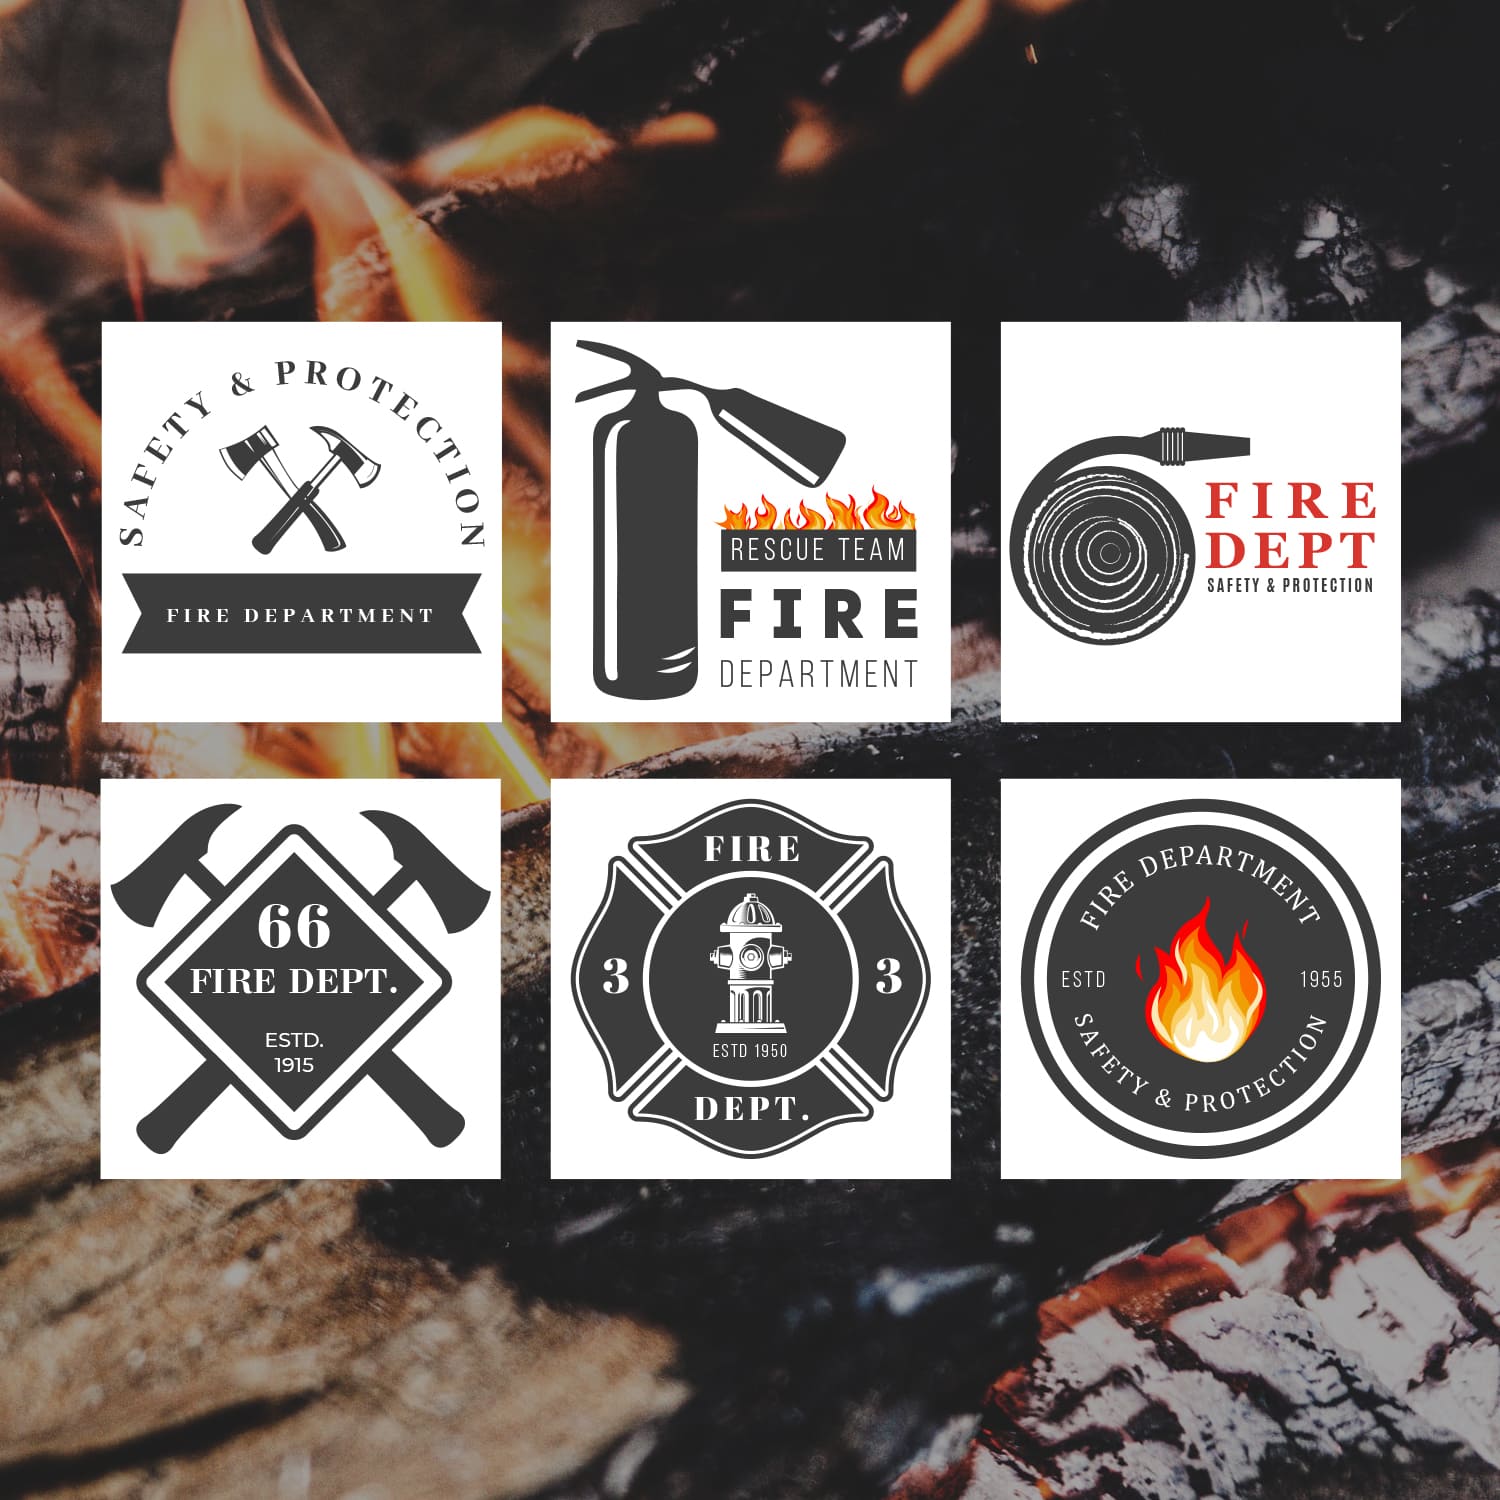 6 fire department logo templates cover.